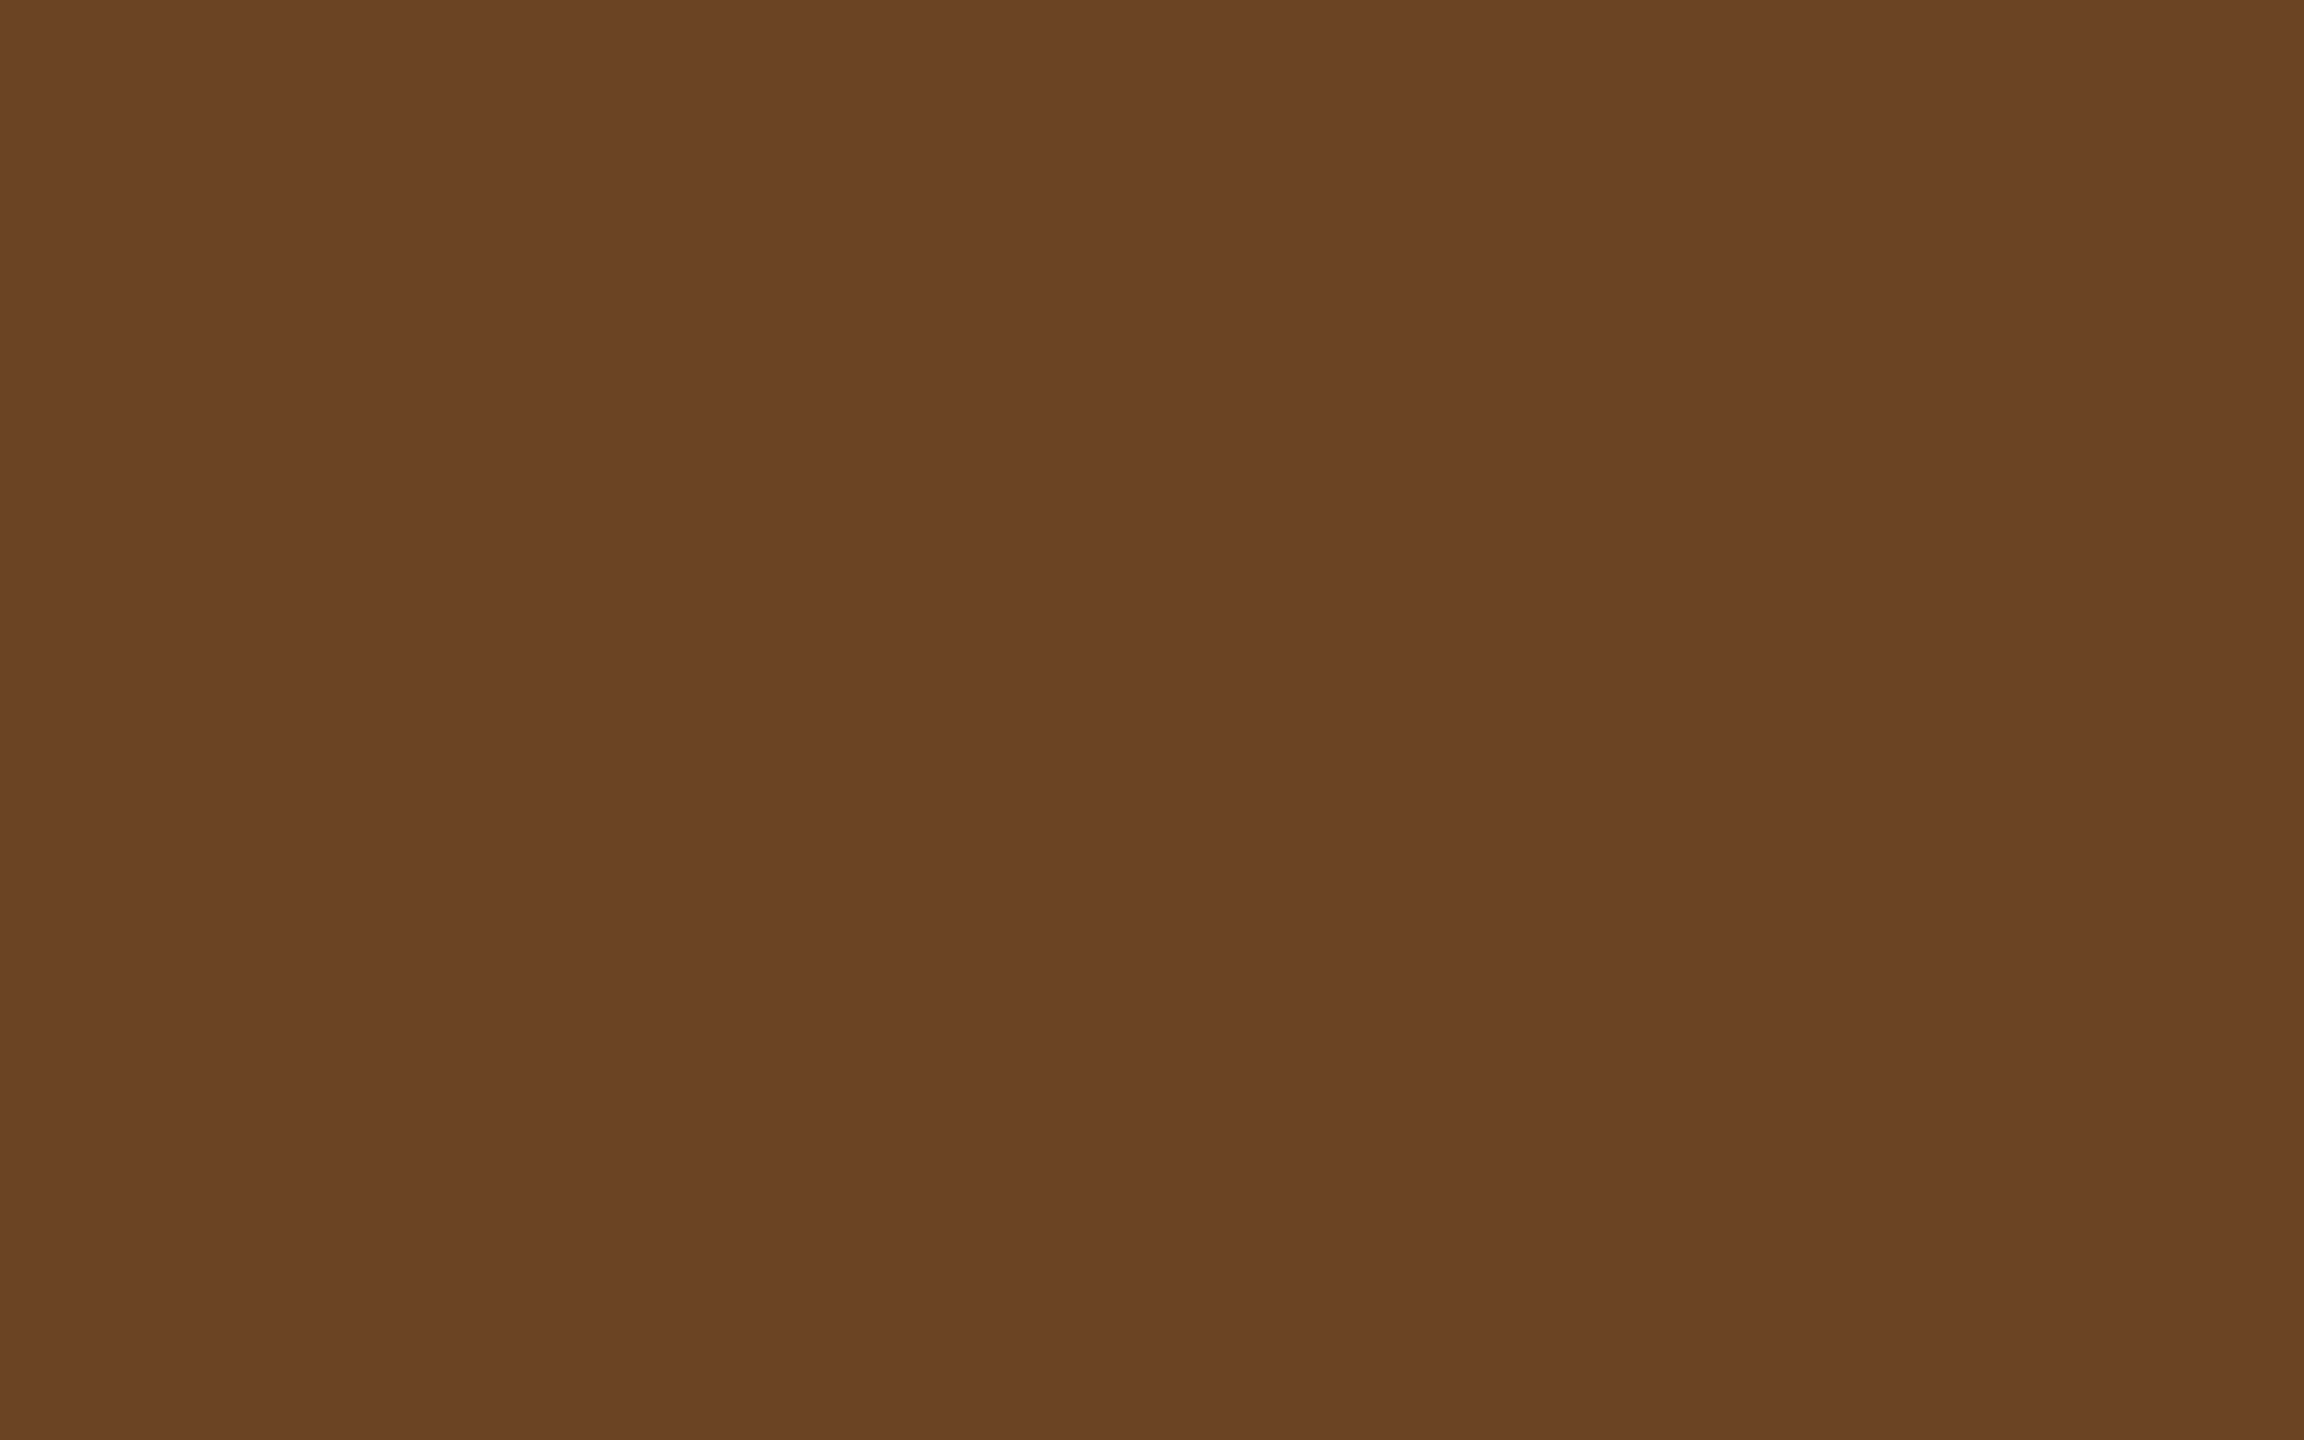 2304x1440 Brown-nose Solid Color Background